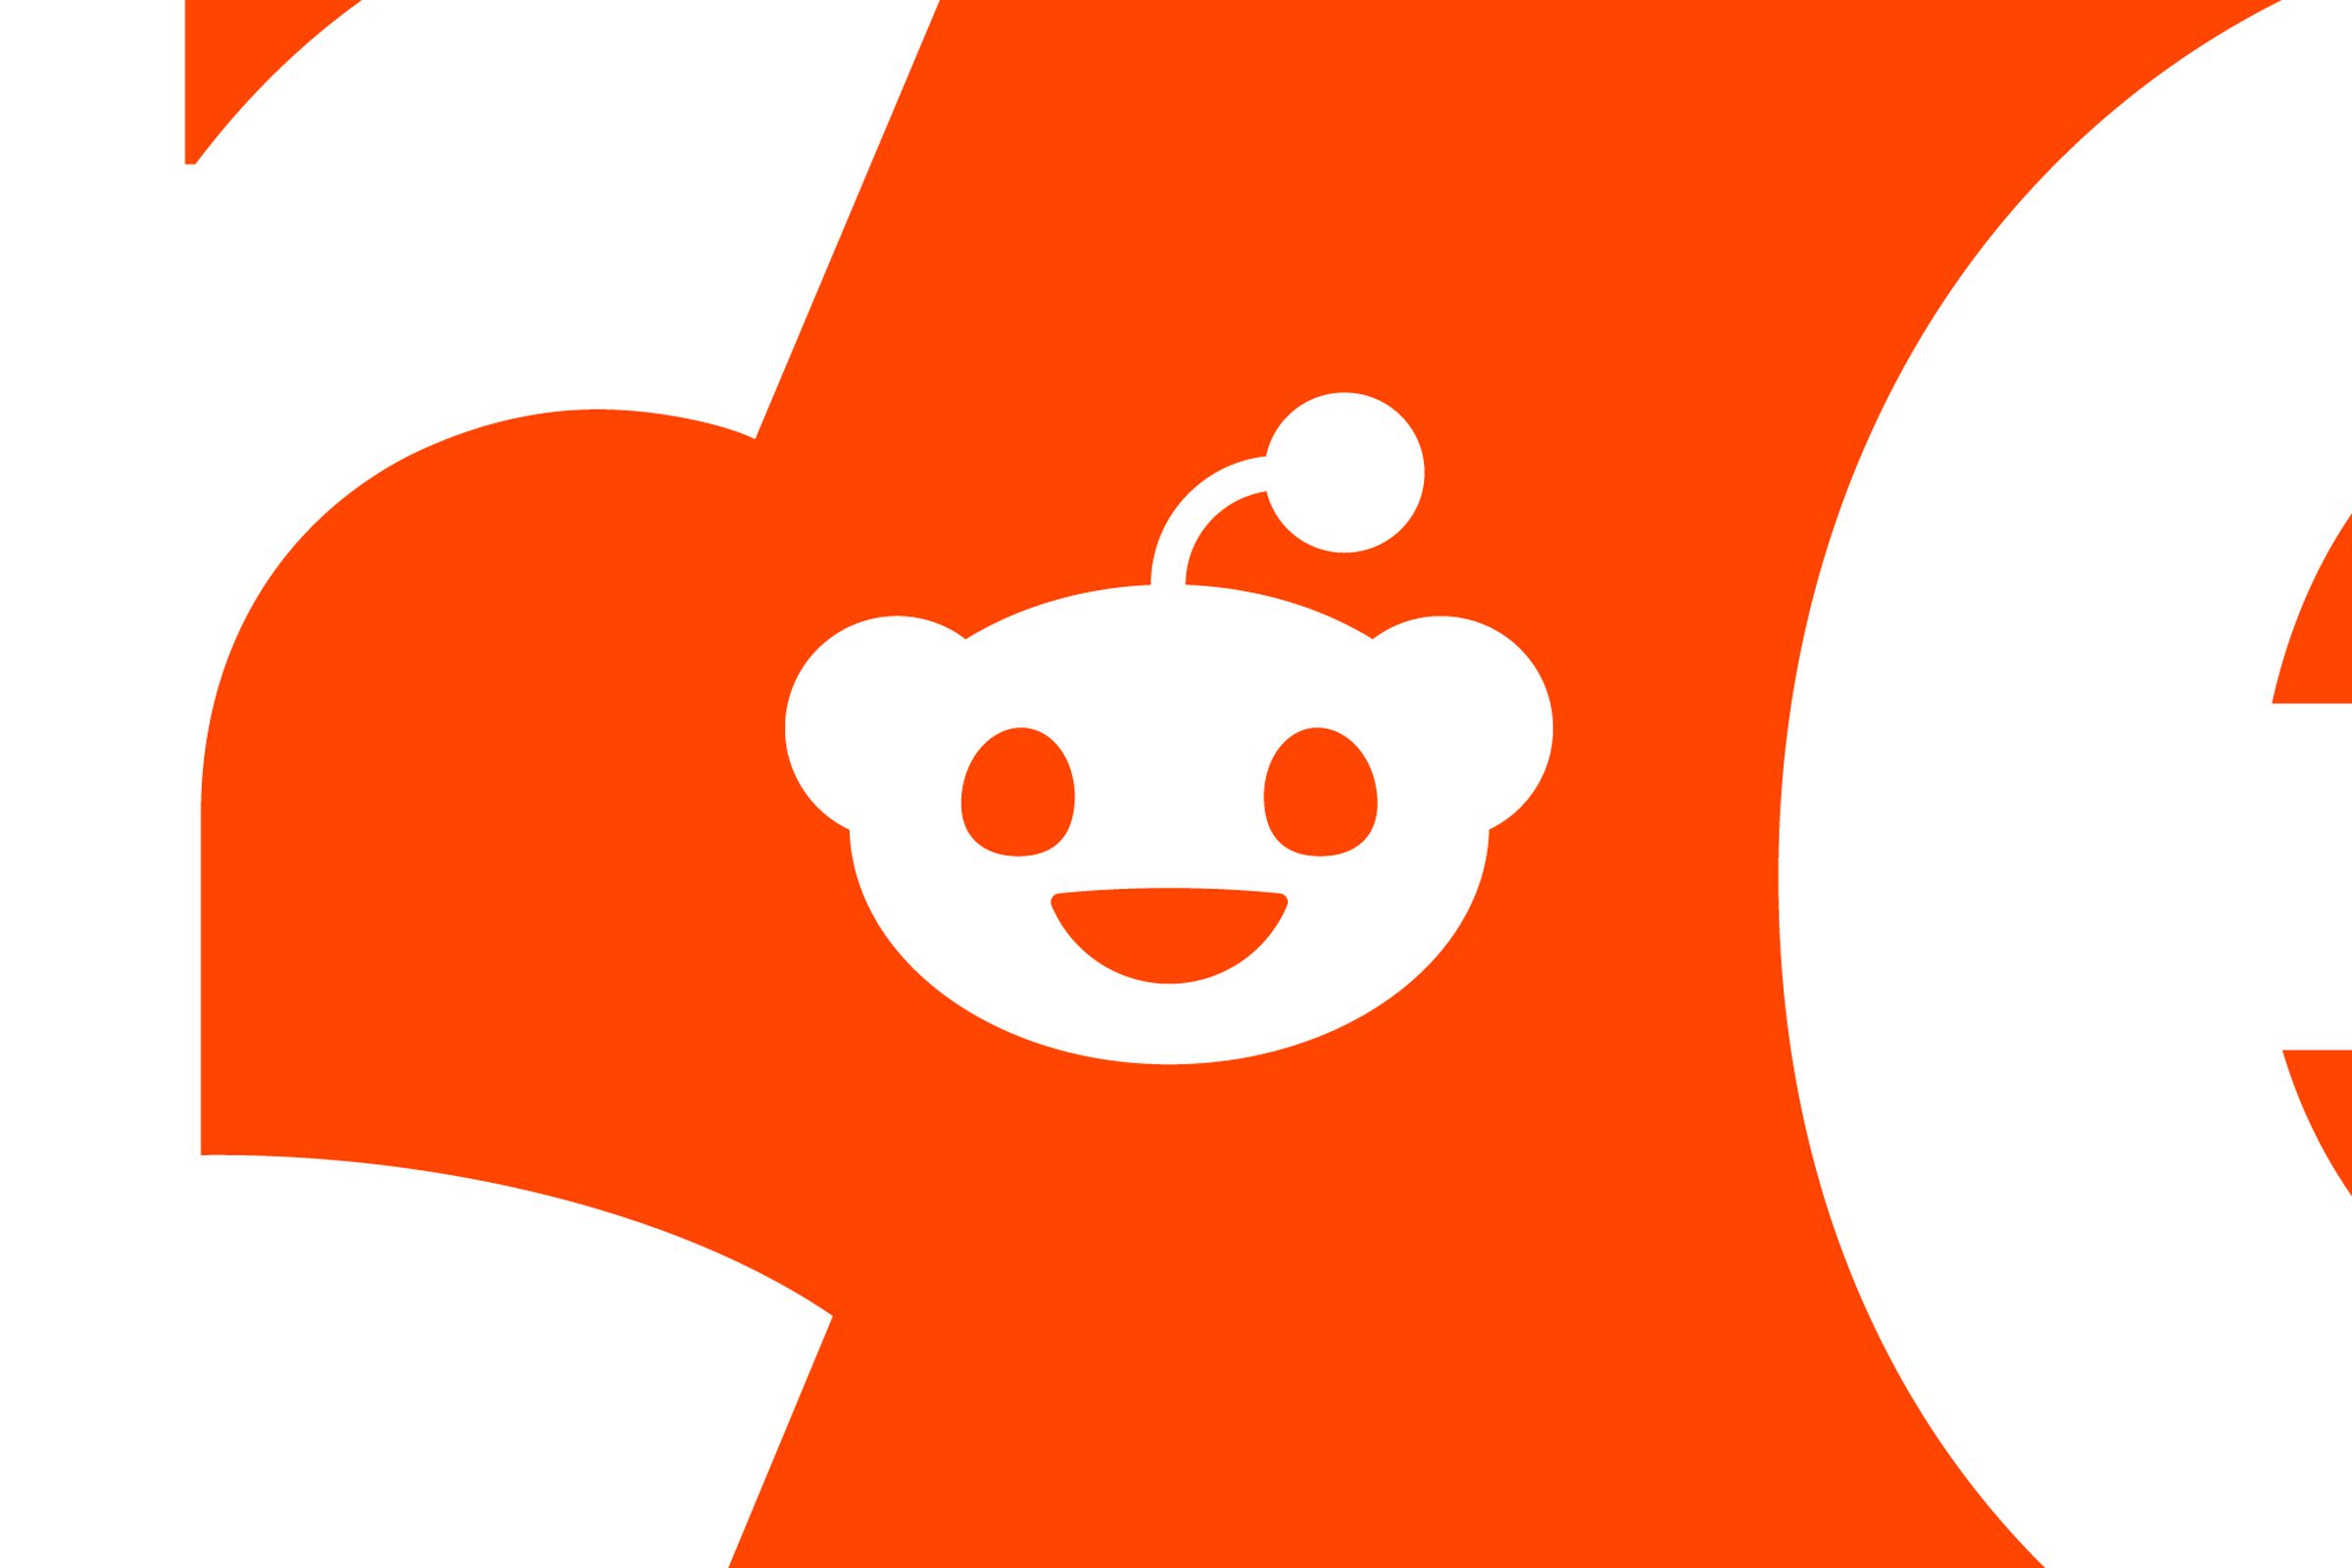 An image showing the Reddit logo on a red and white background